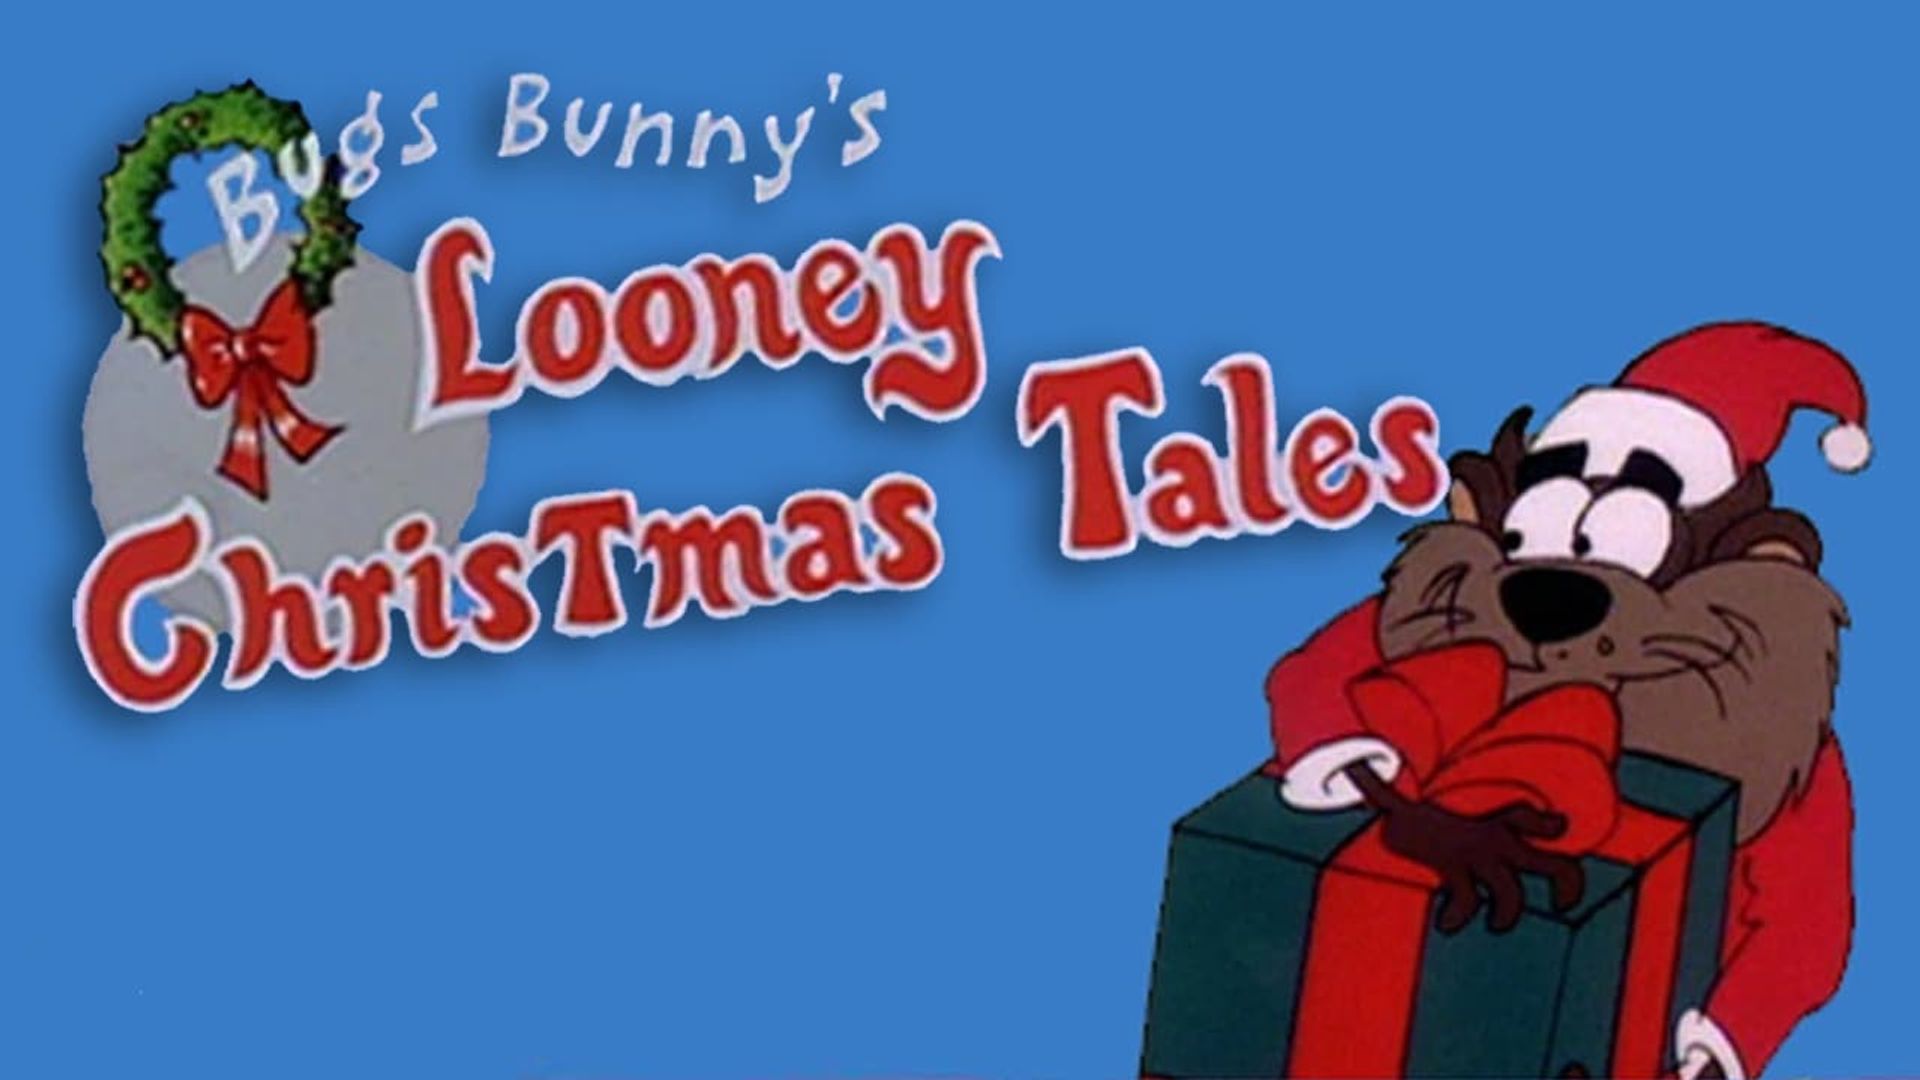 Bugs Bunny's Looney Christmas Tales background